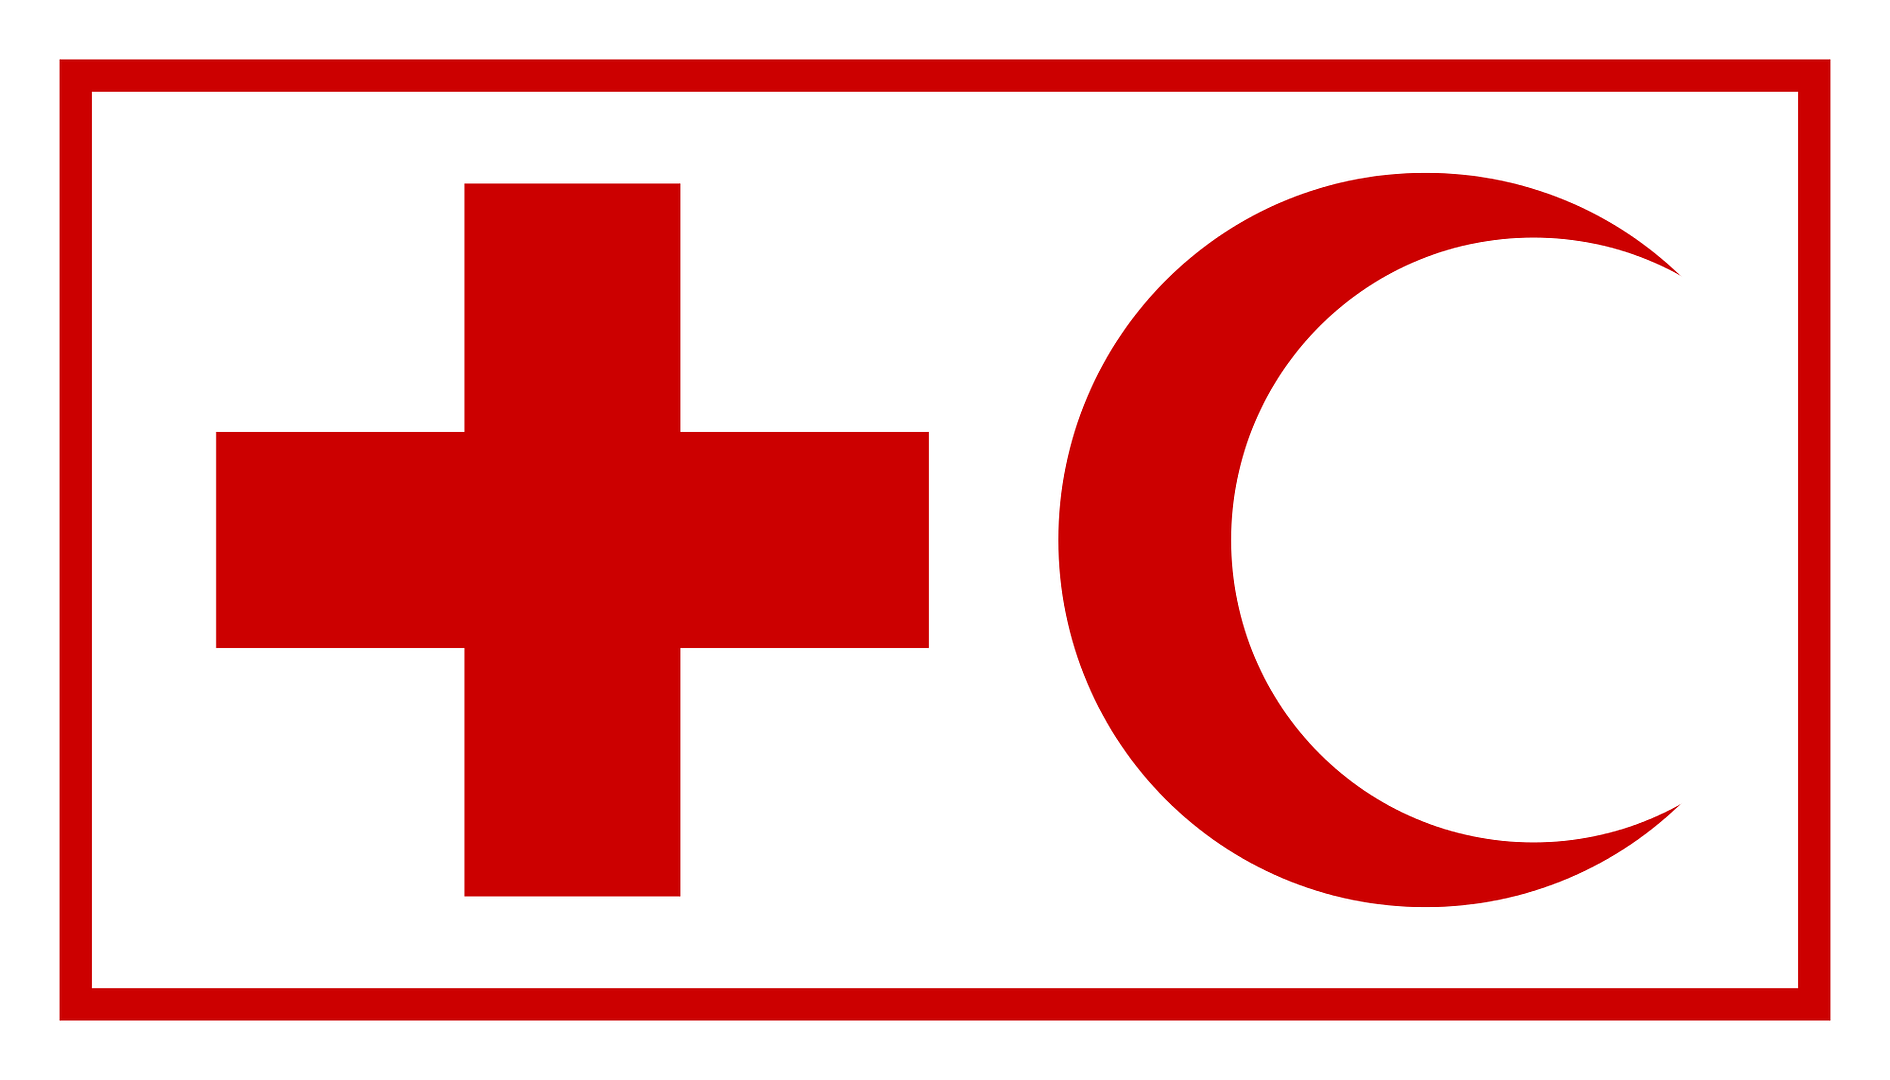 Using tech to help the Paris Terrorist Attack victims: IFRC donations